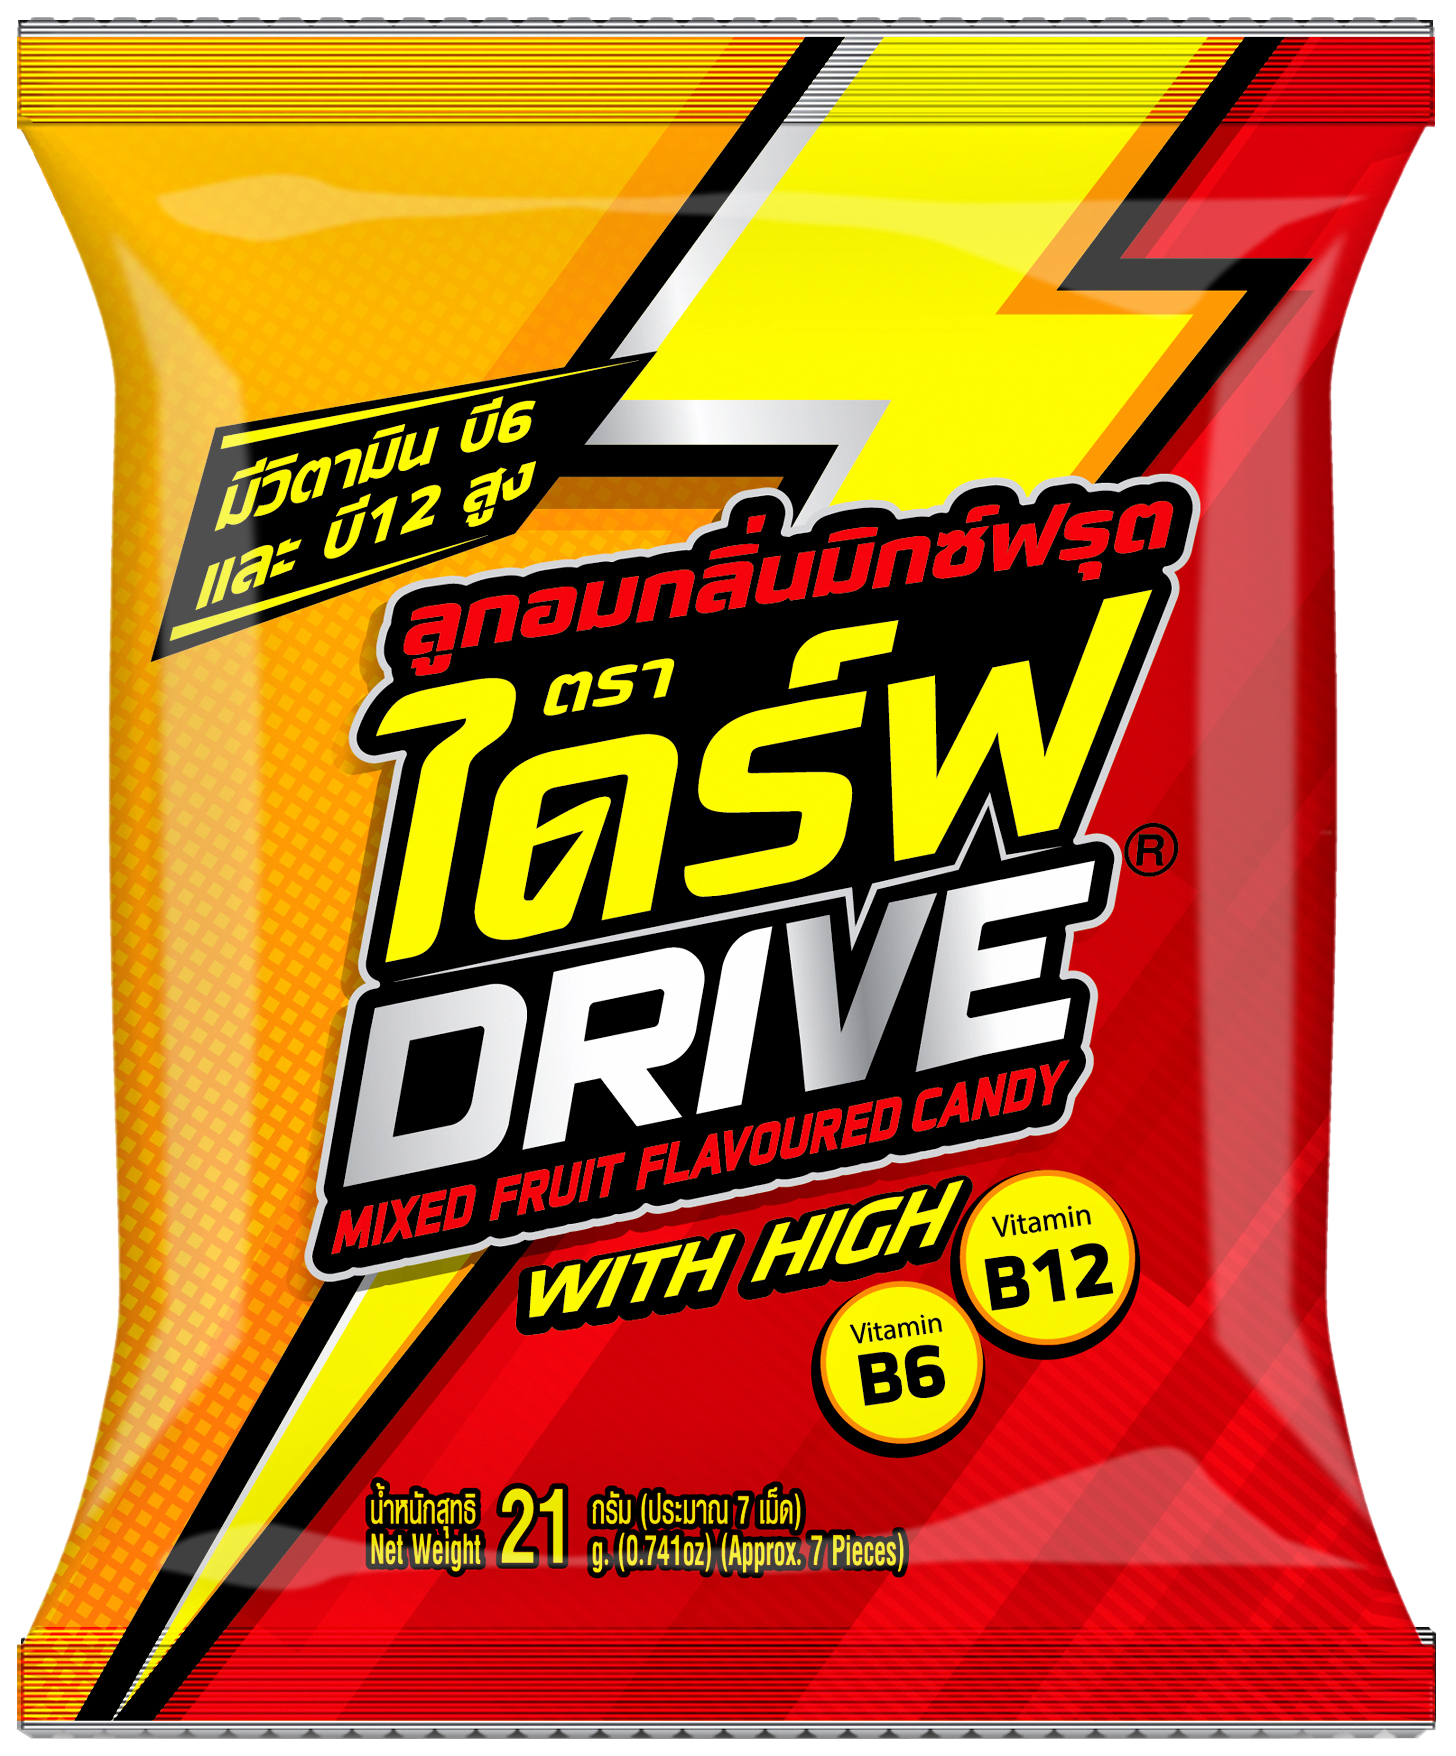 DRIVE Mixed Fruit Flavoured Candy